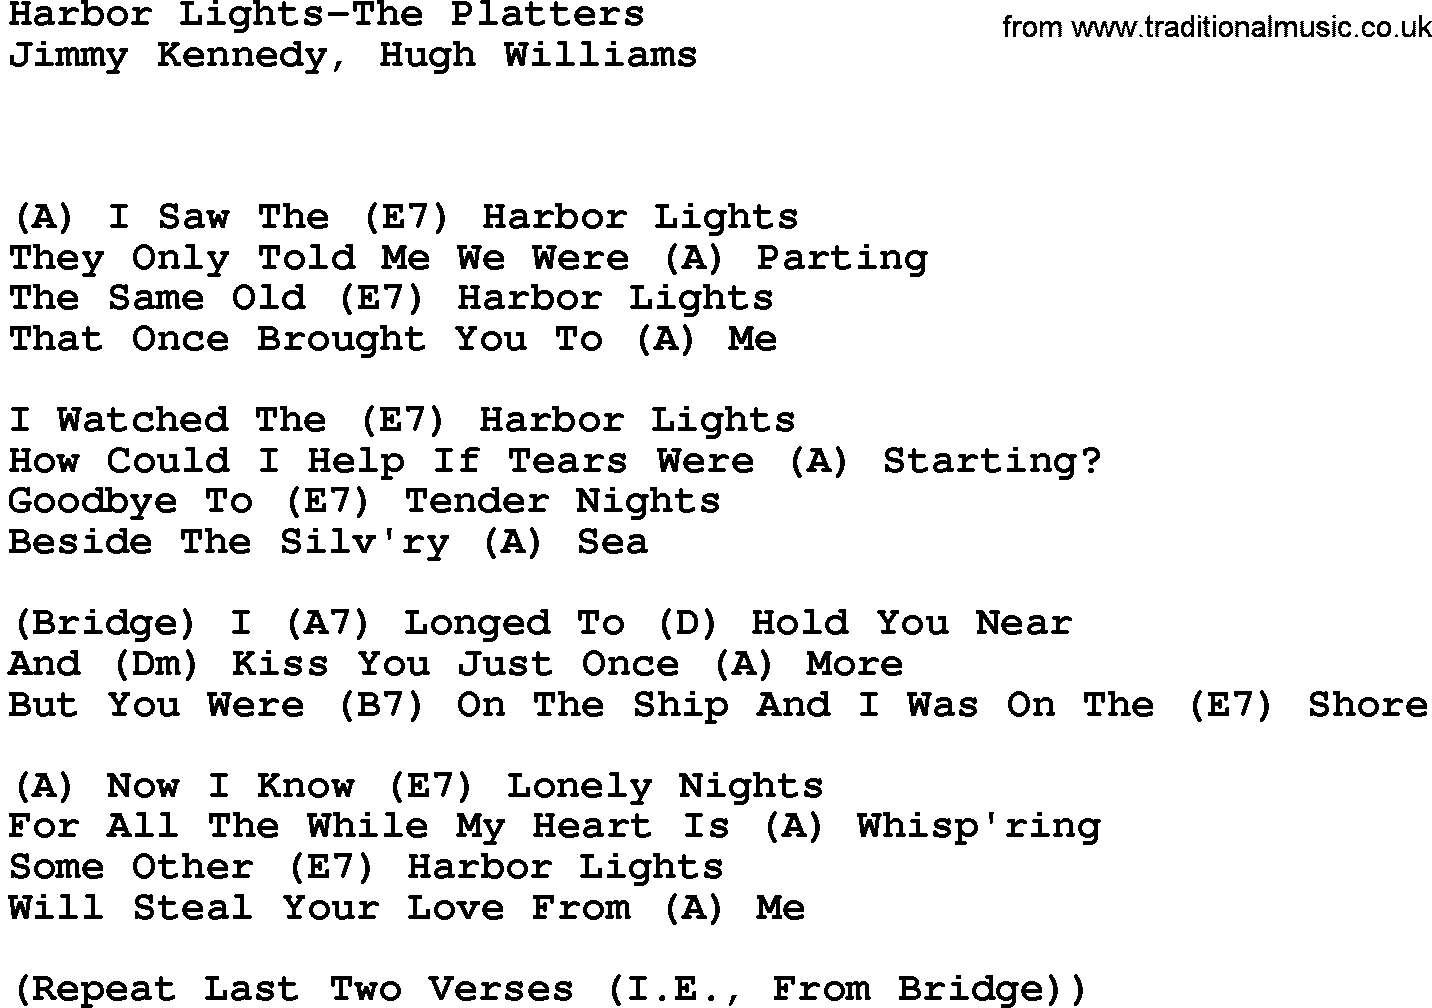 Country music song: Harbor Lights-The Platters lyrics and chords